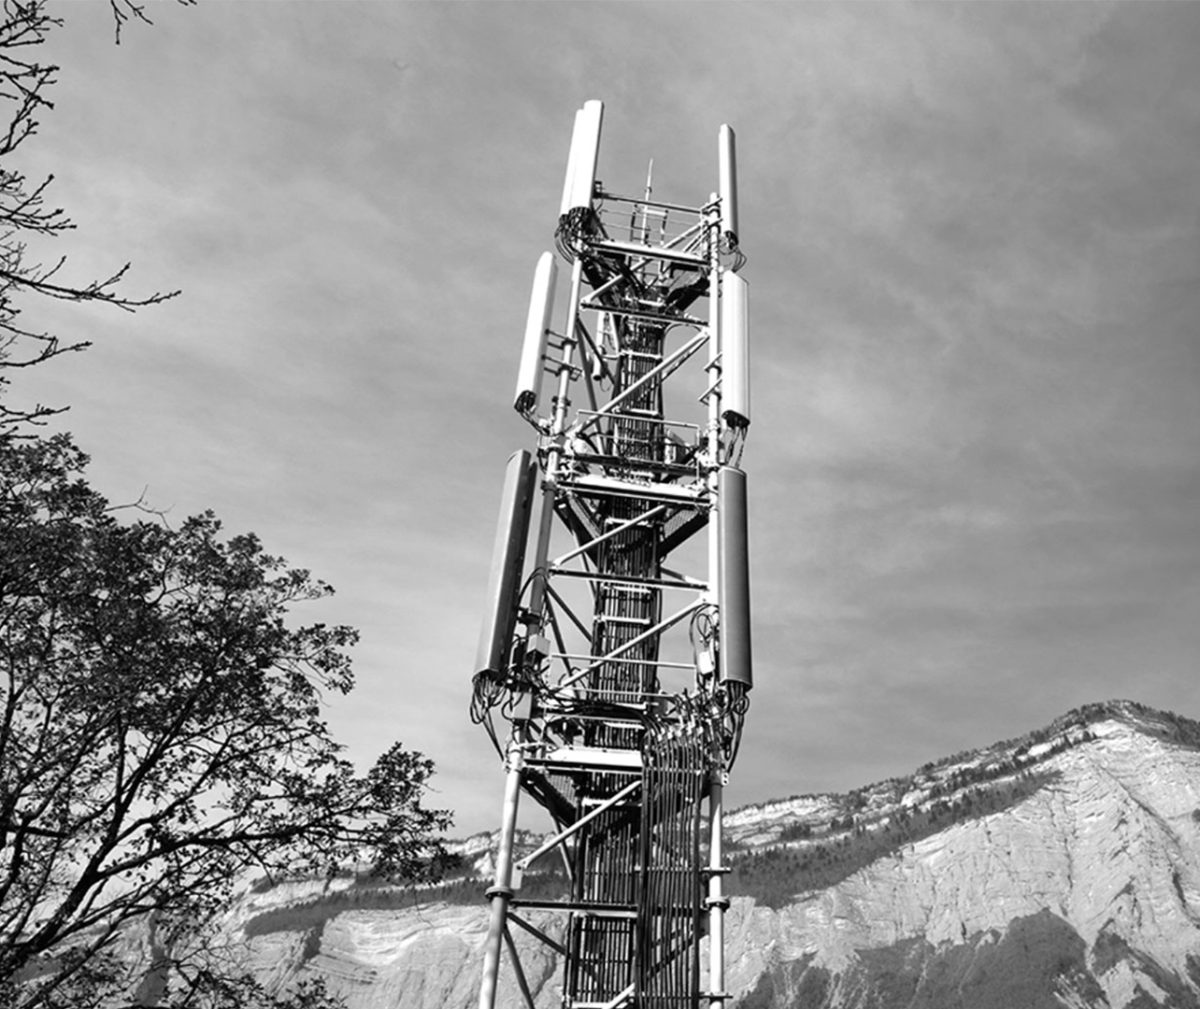 Black and white image of a telecommunications tower